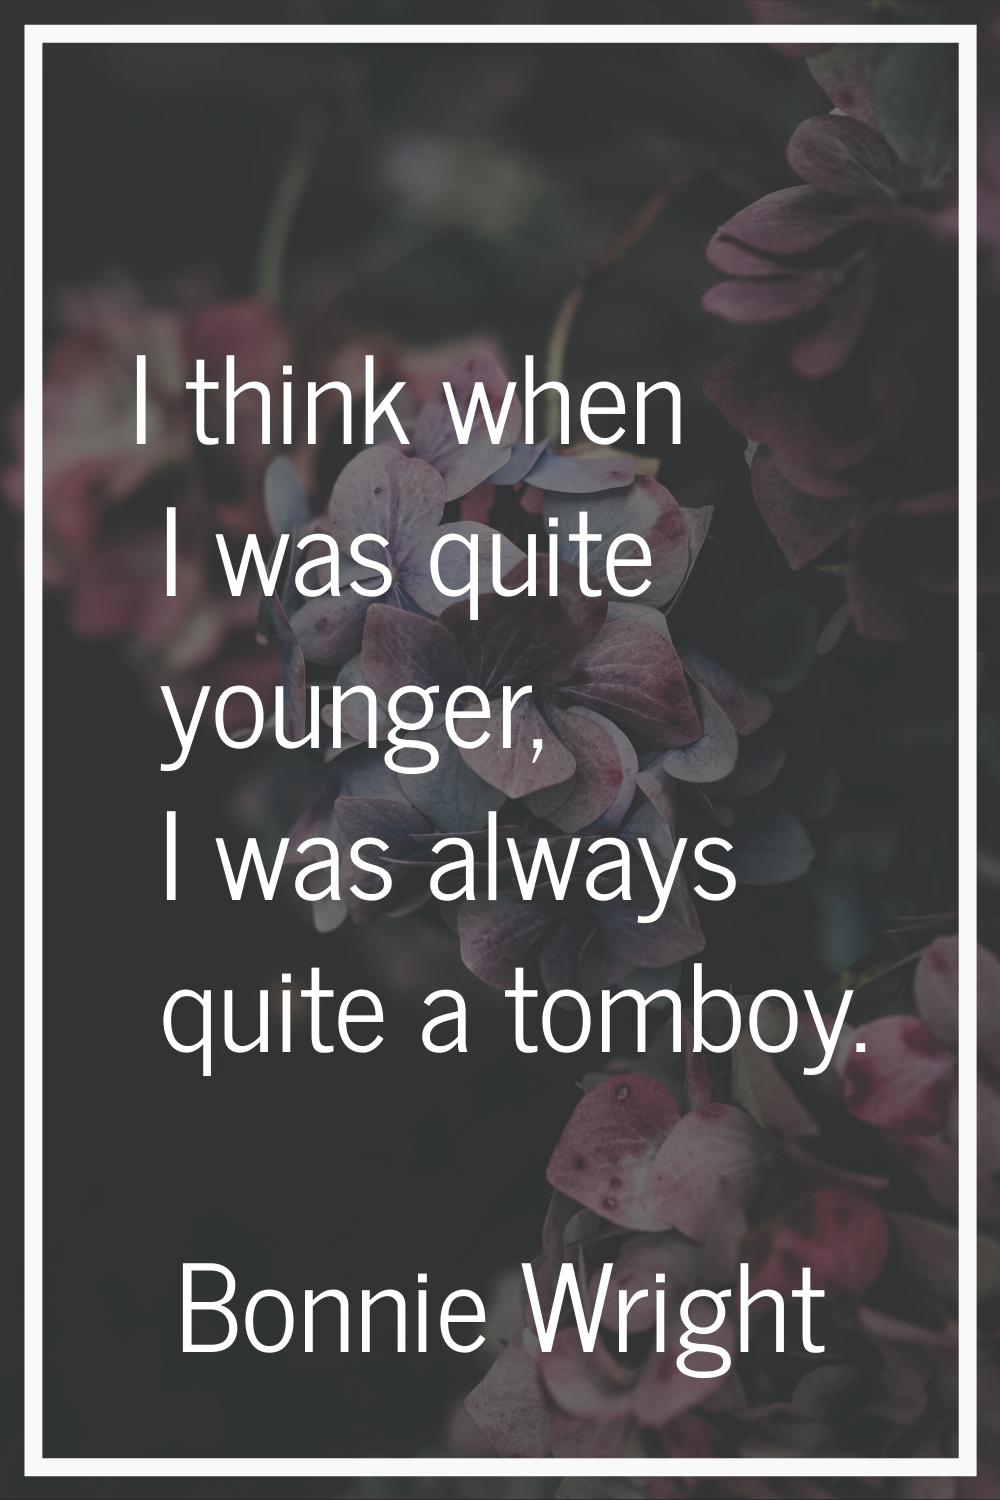 I think when I was quite younger, I was always quite a tomboy.